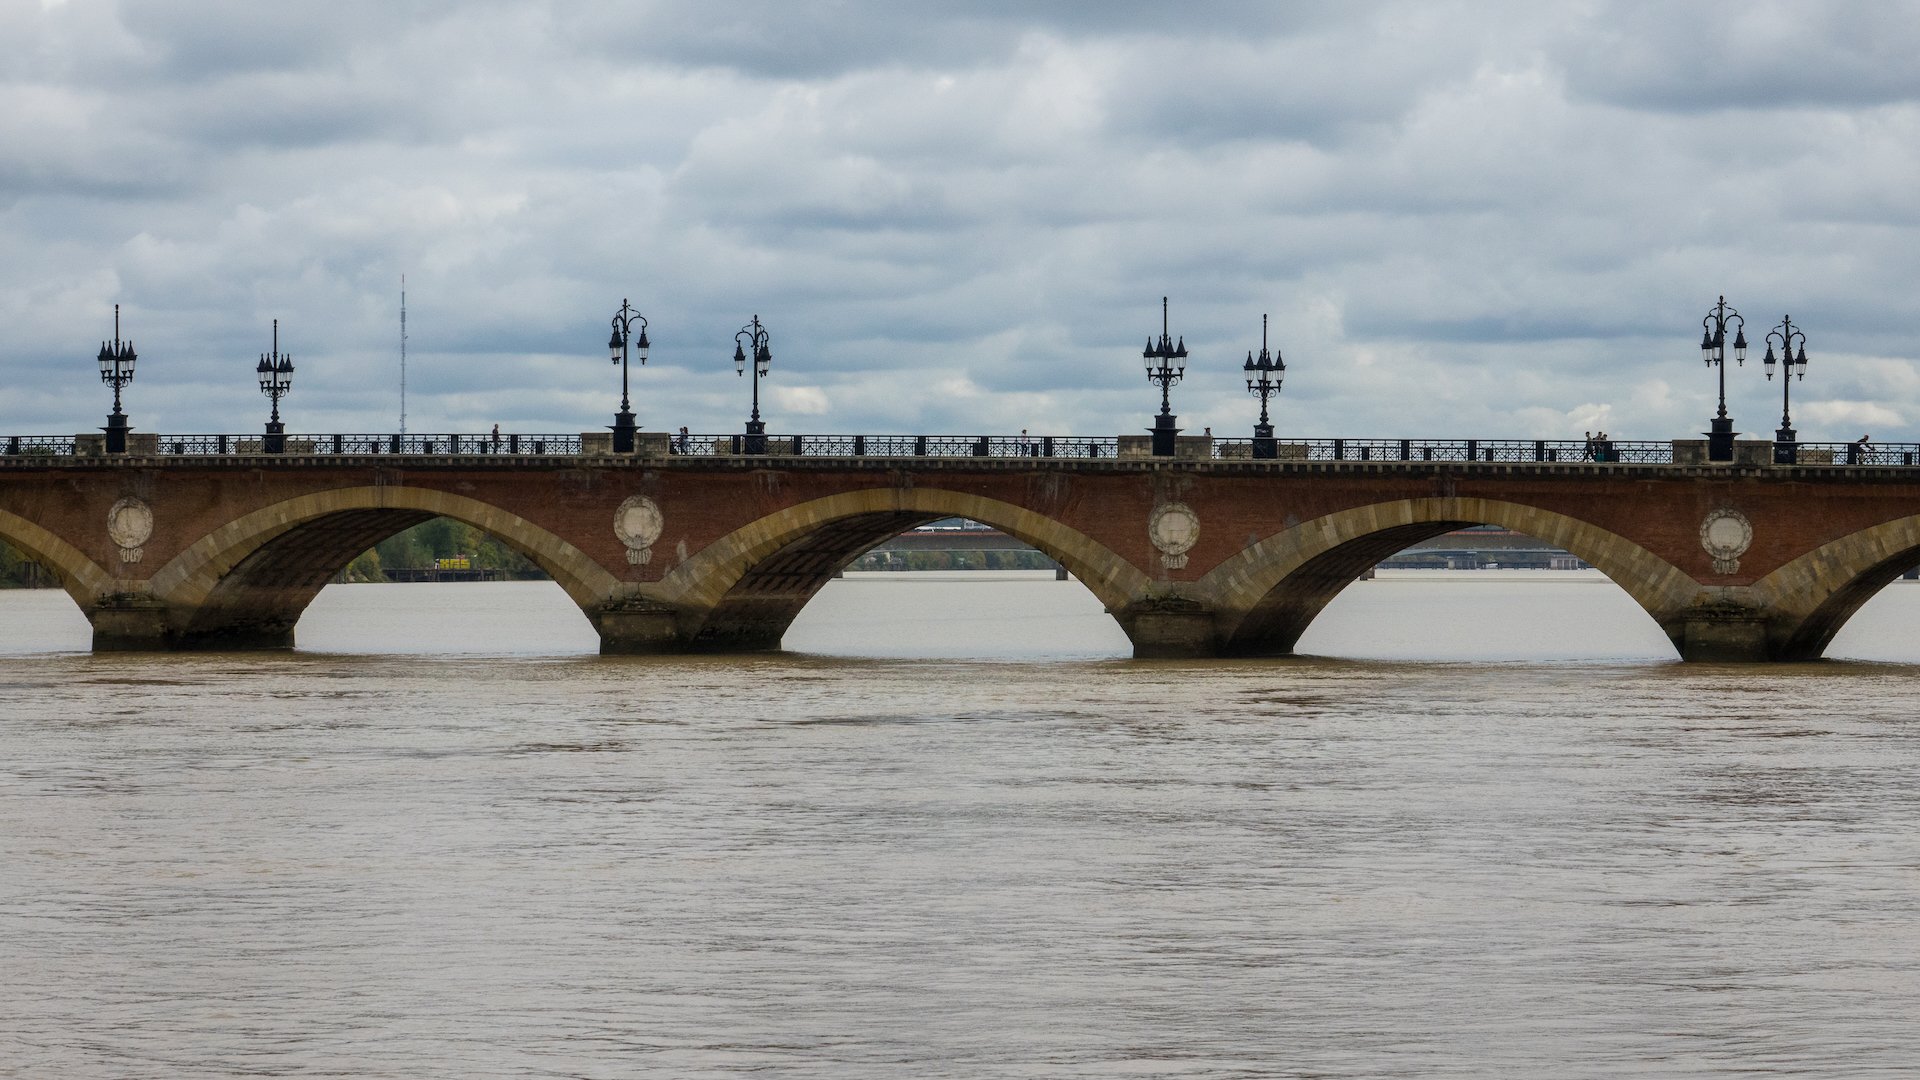   The Pont de Pierre (Peter's Bridge)  is the oldest bridge in Bordeaux. It was built at the beginning of the 19th century, which is very late considering the origins of the city. 